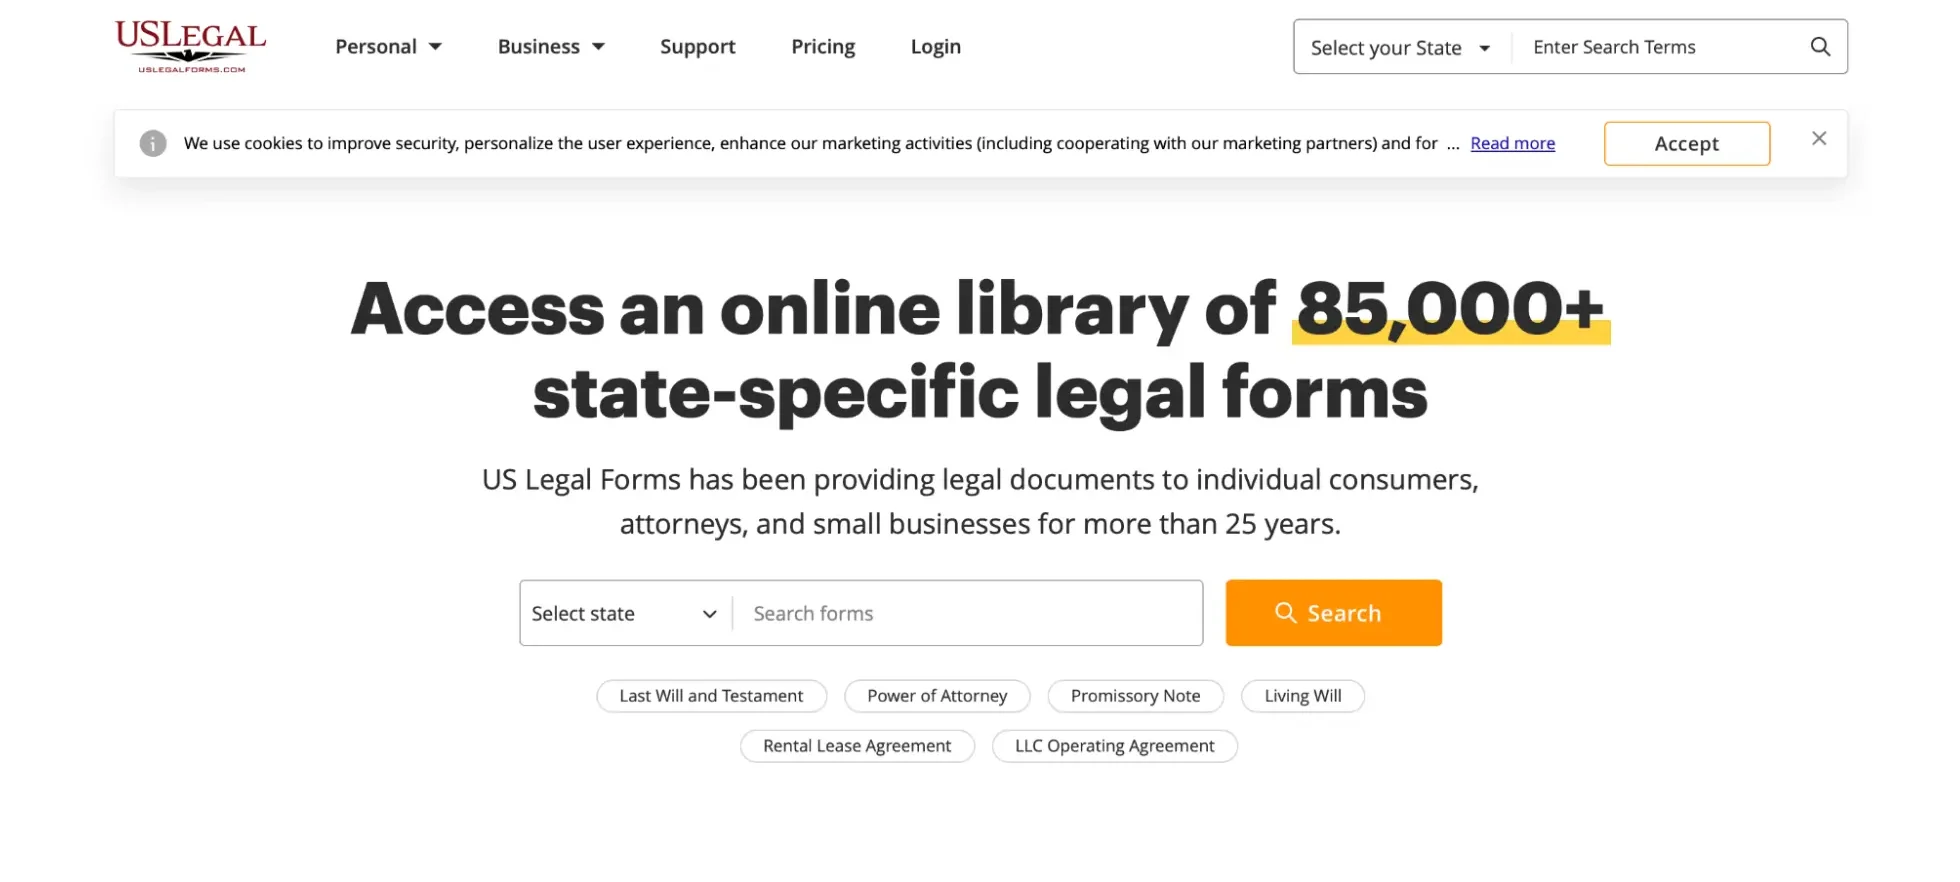 This image shows the USLegal home page.